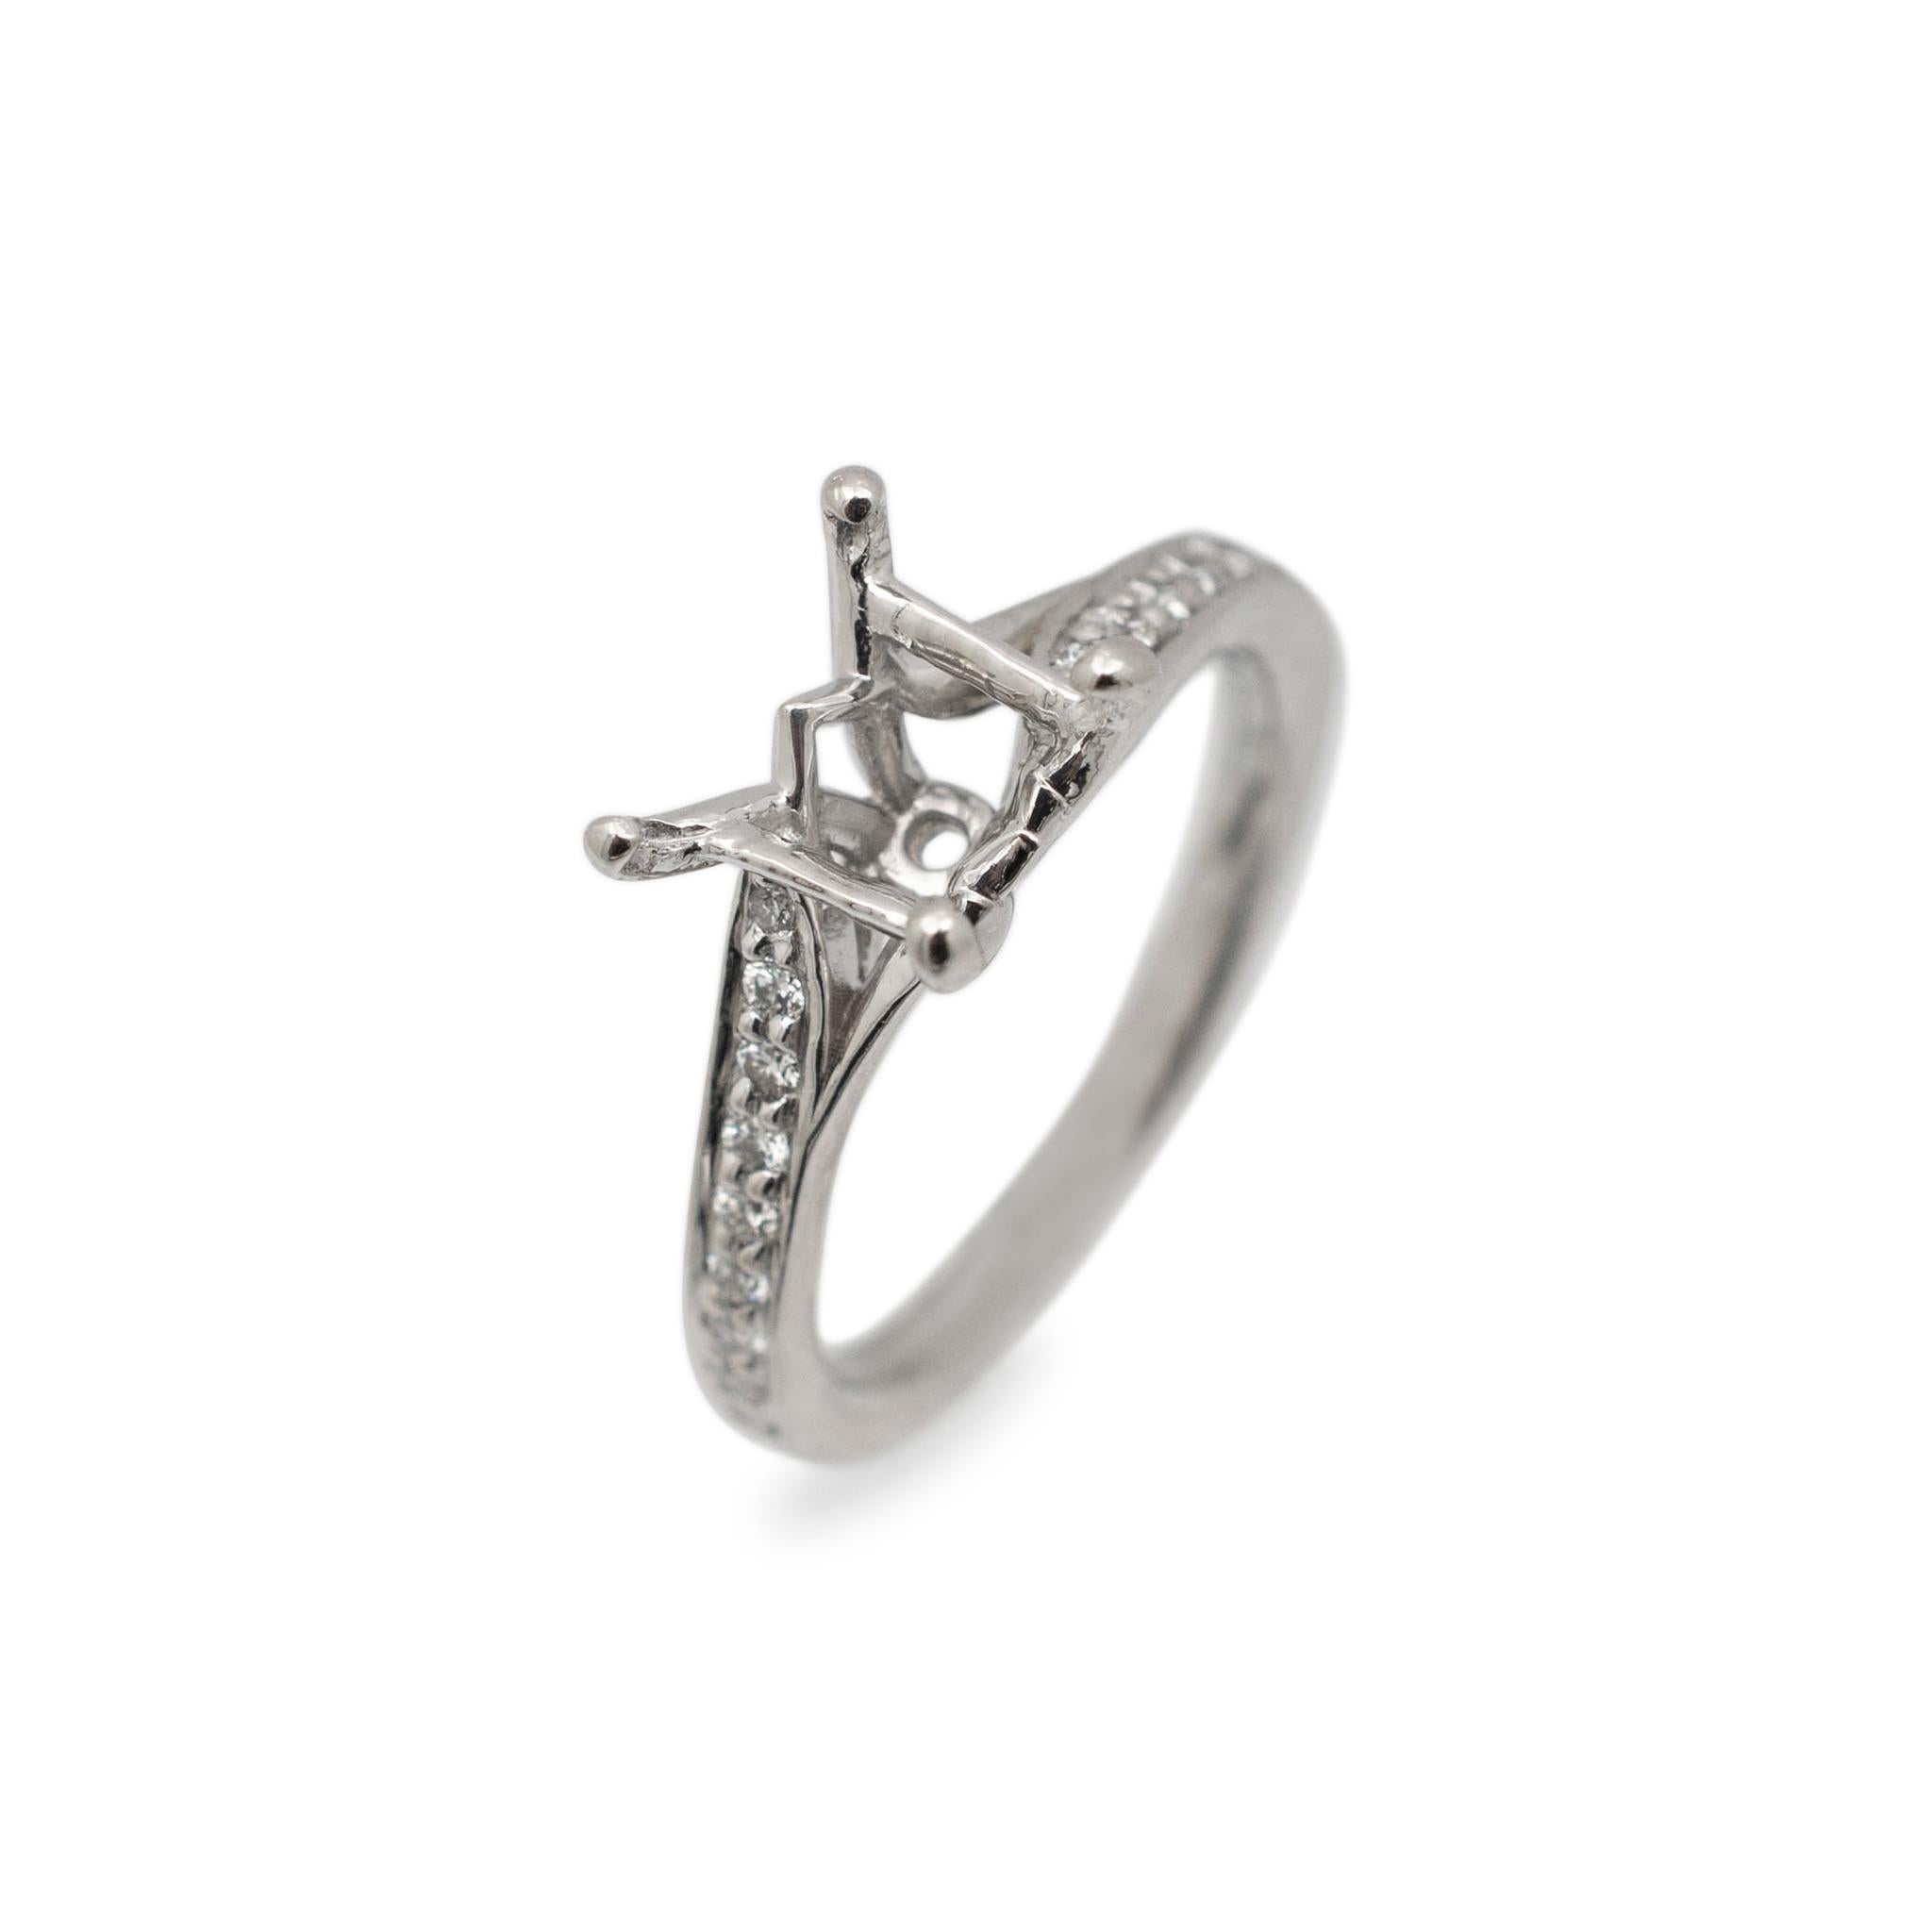 Gender: Ladies

Metal Type: 18K White Gold

Size: 4

Shank Maximum Width: 2.10

Weight: 3.27 grams

Ladies 18K white gold, diamond engagement semi-mount ring with a half round shank. The semi mount can accommodate a square stone measures between